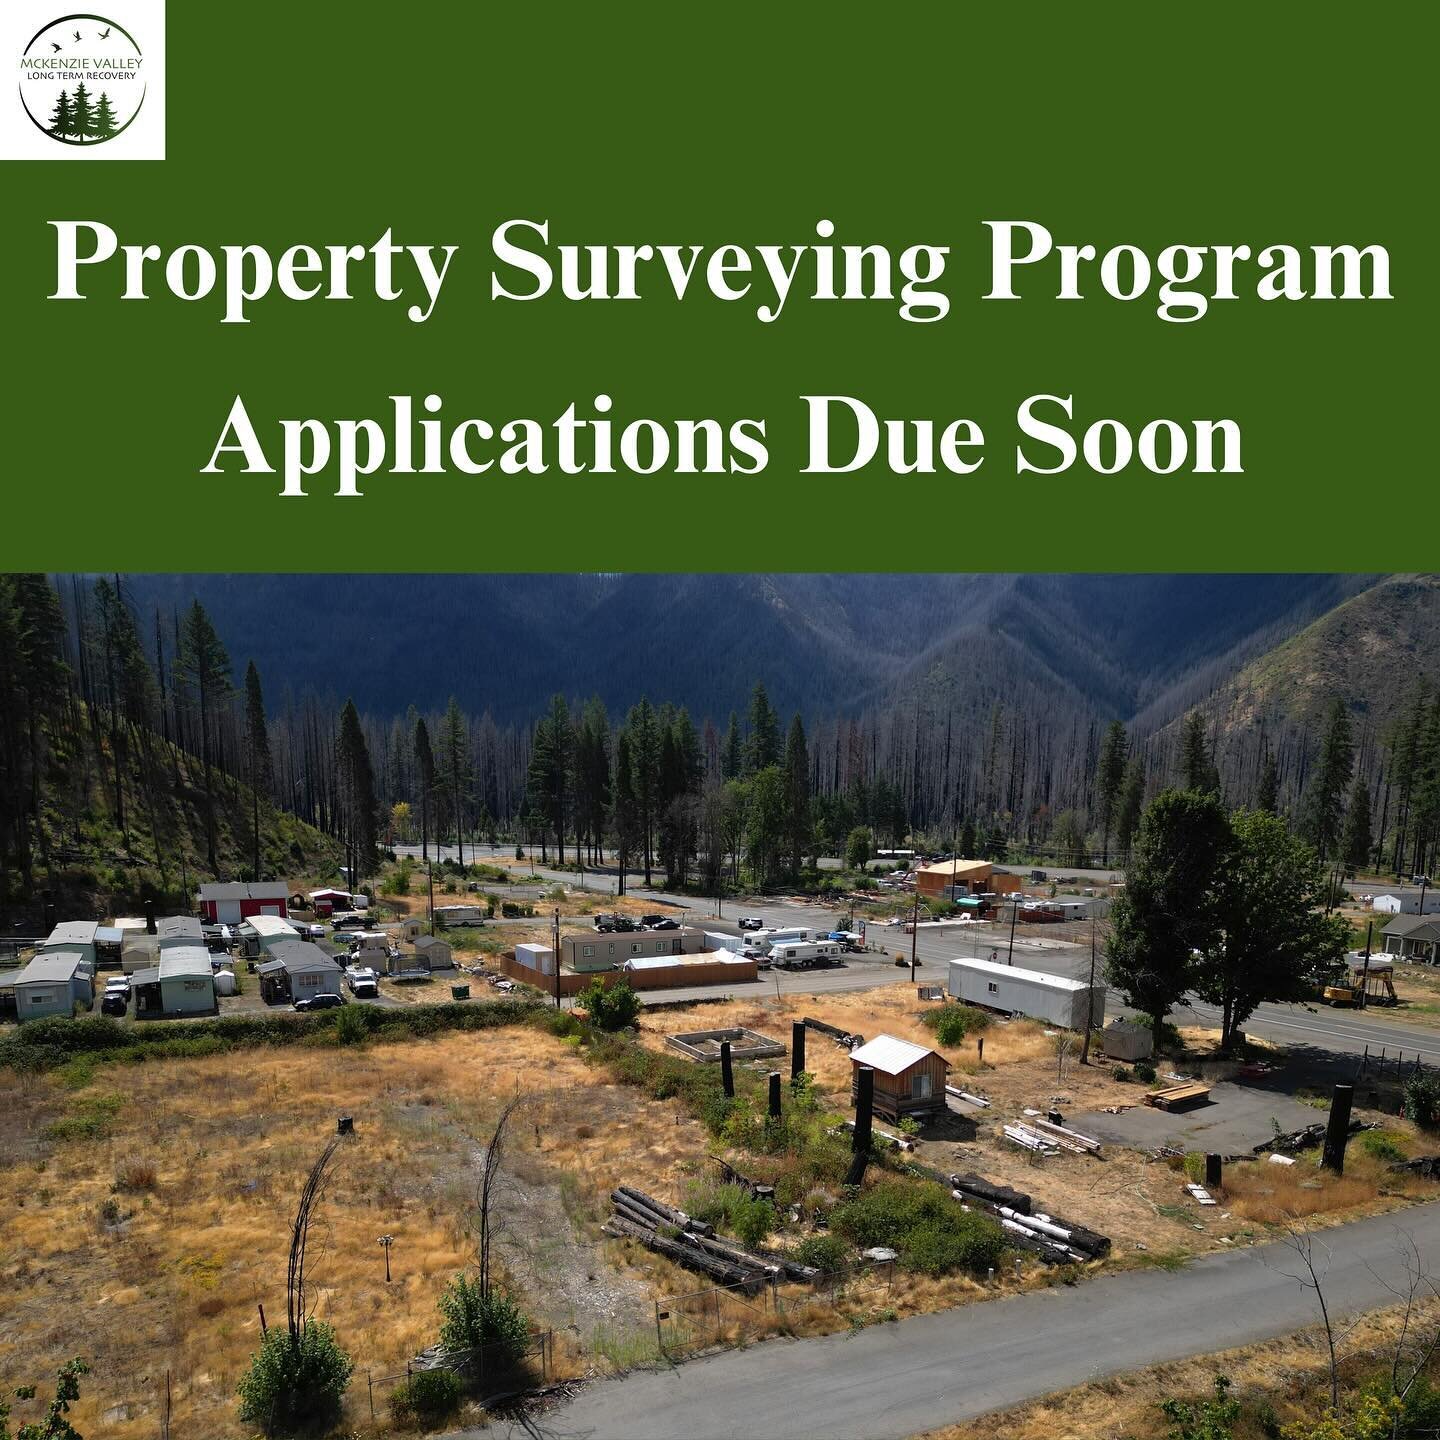 Time is running out! 

The application deadline to get help from our Property Surveying and Reimbursement Program is April 15.

Landowners, make sure to apply before April 15th to be eligible.
Remember, surveying must be completed within 60 days of a